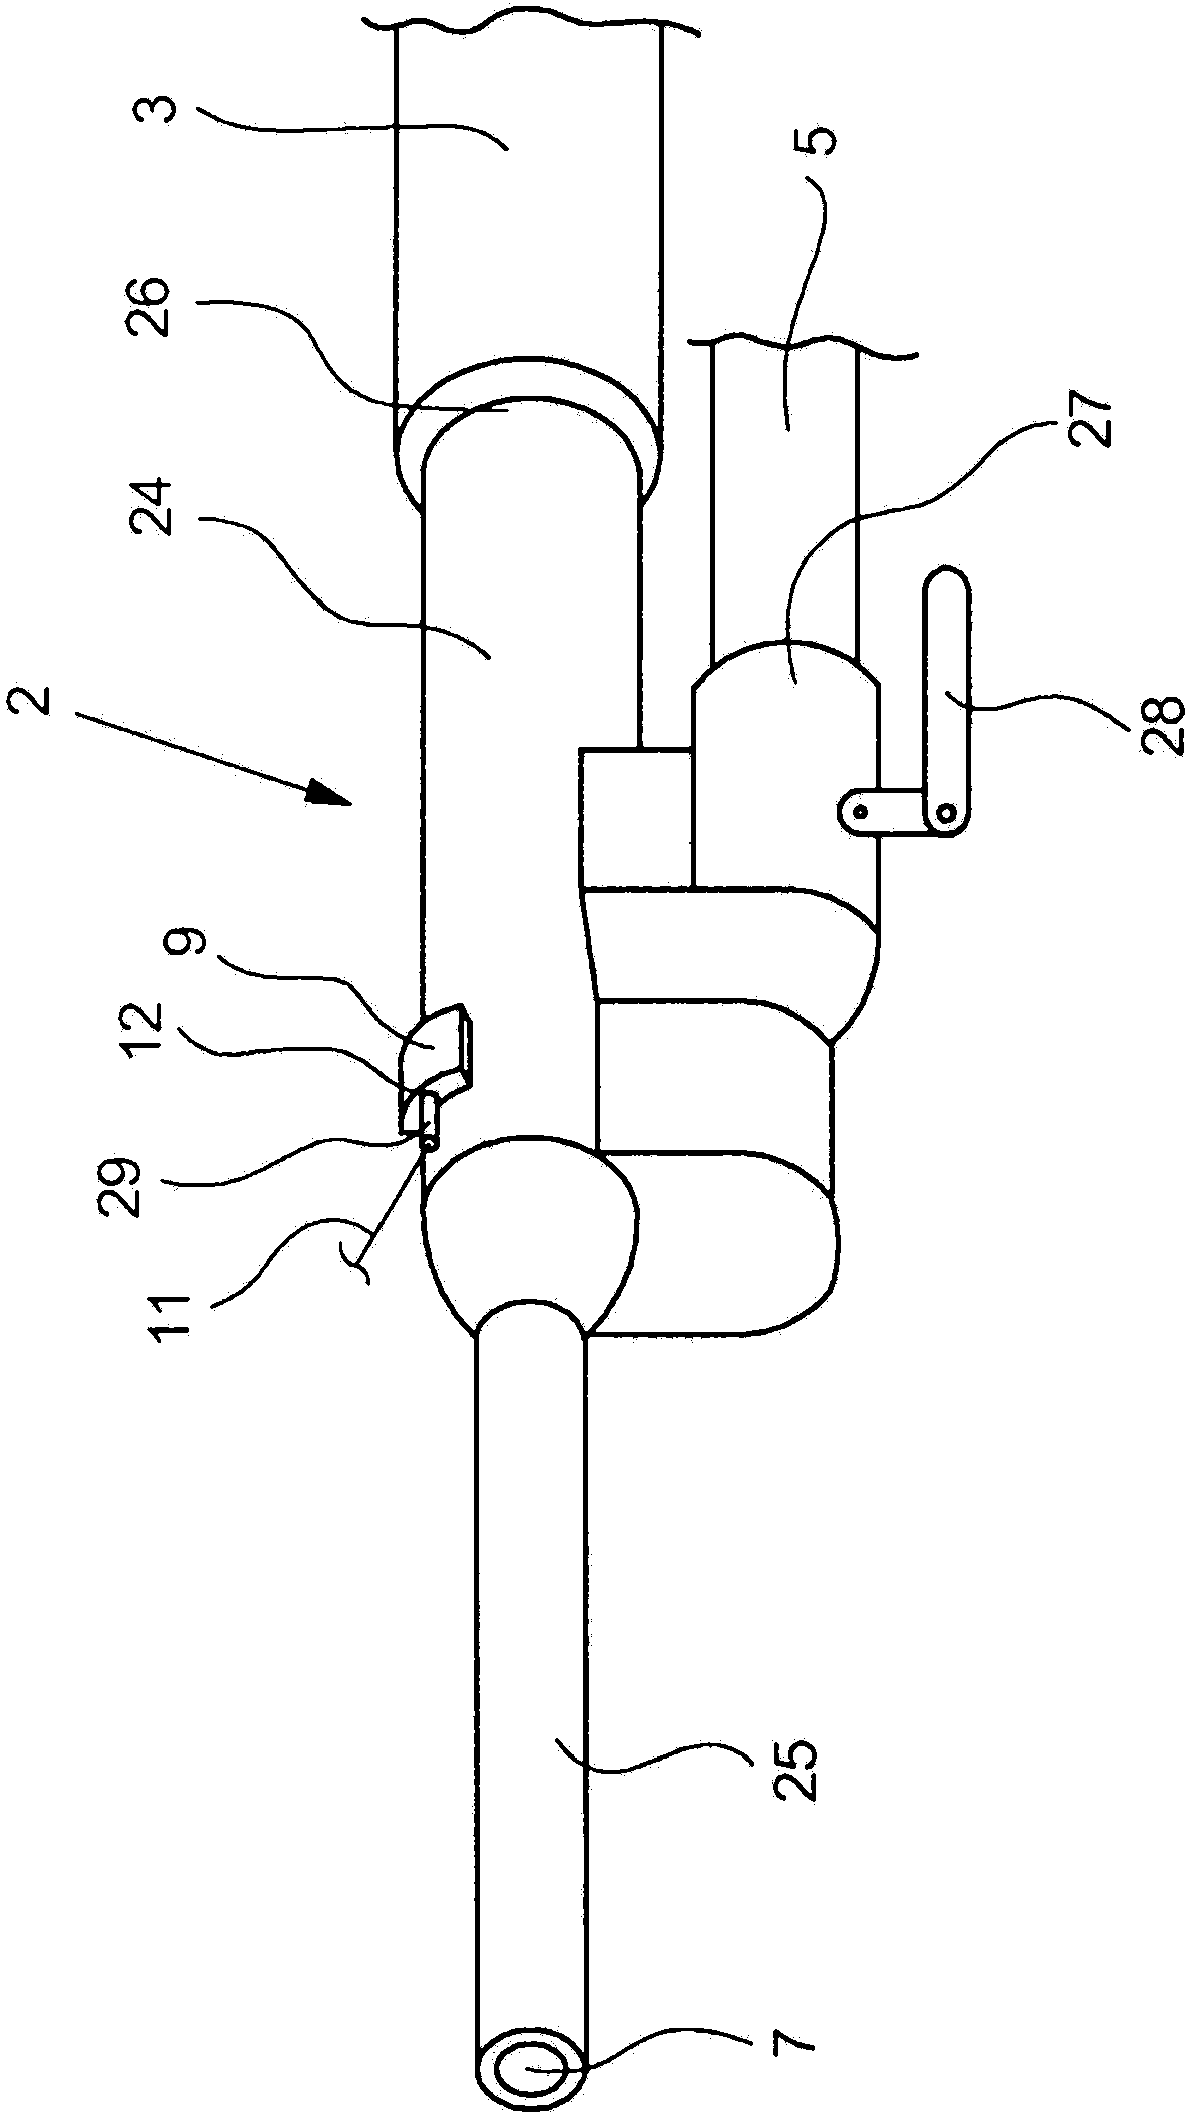 Auxiliary apparatus for the manual guidance of moving threads